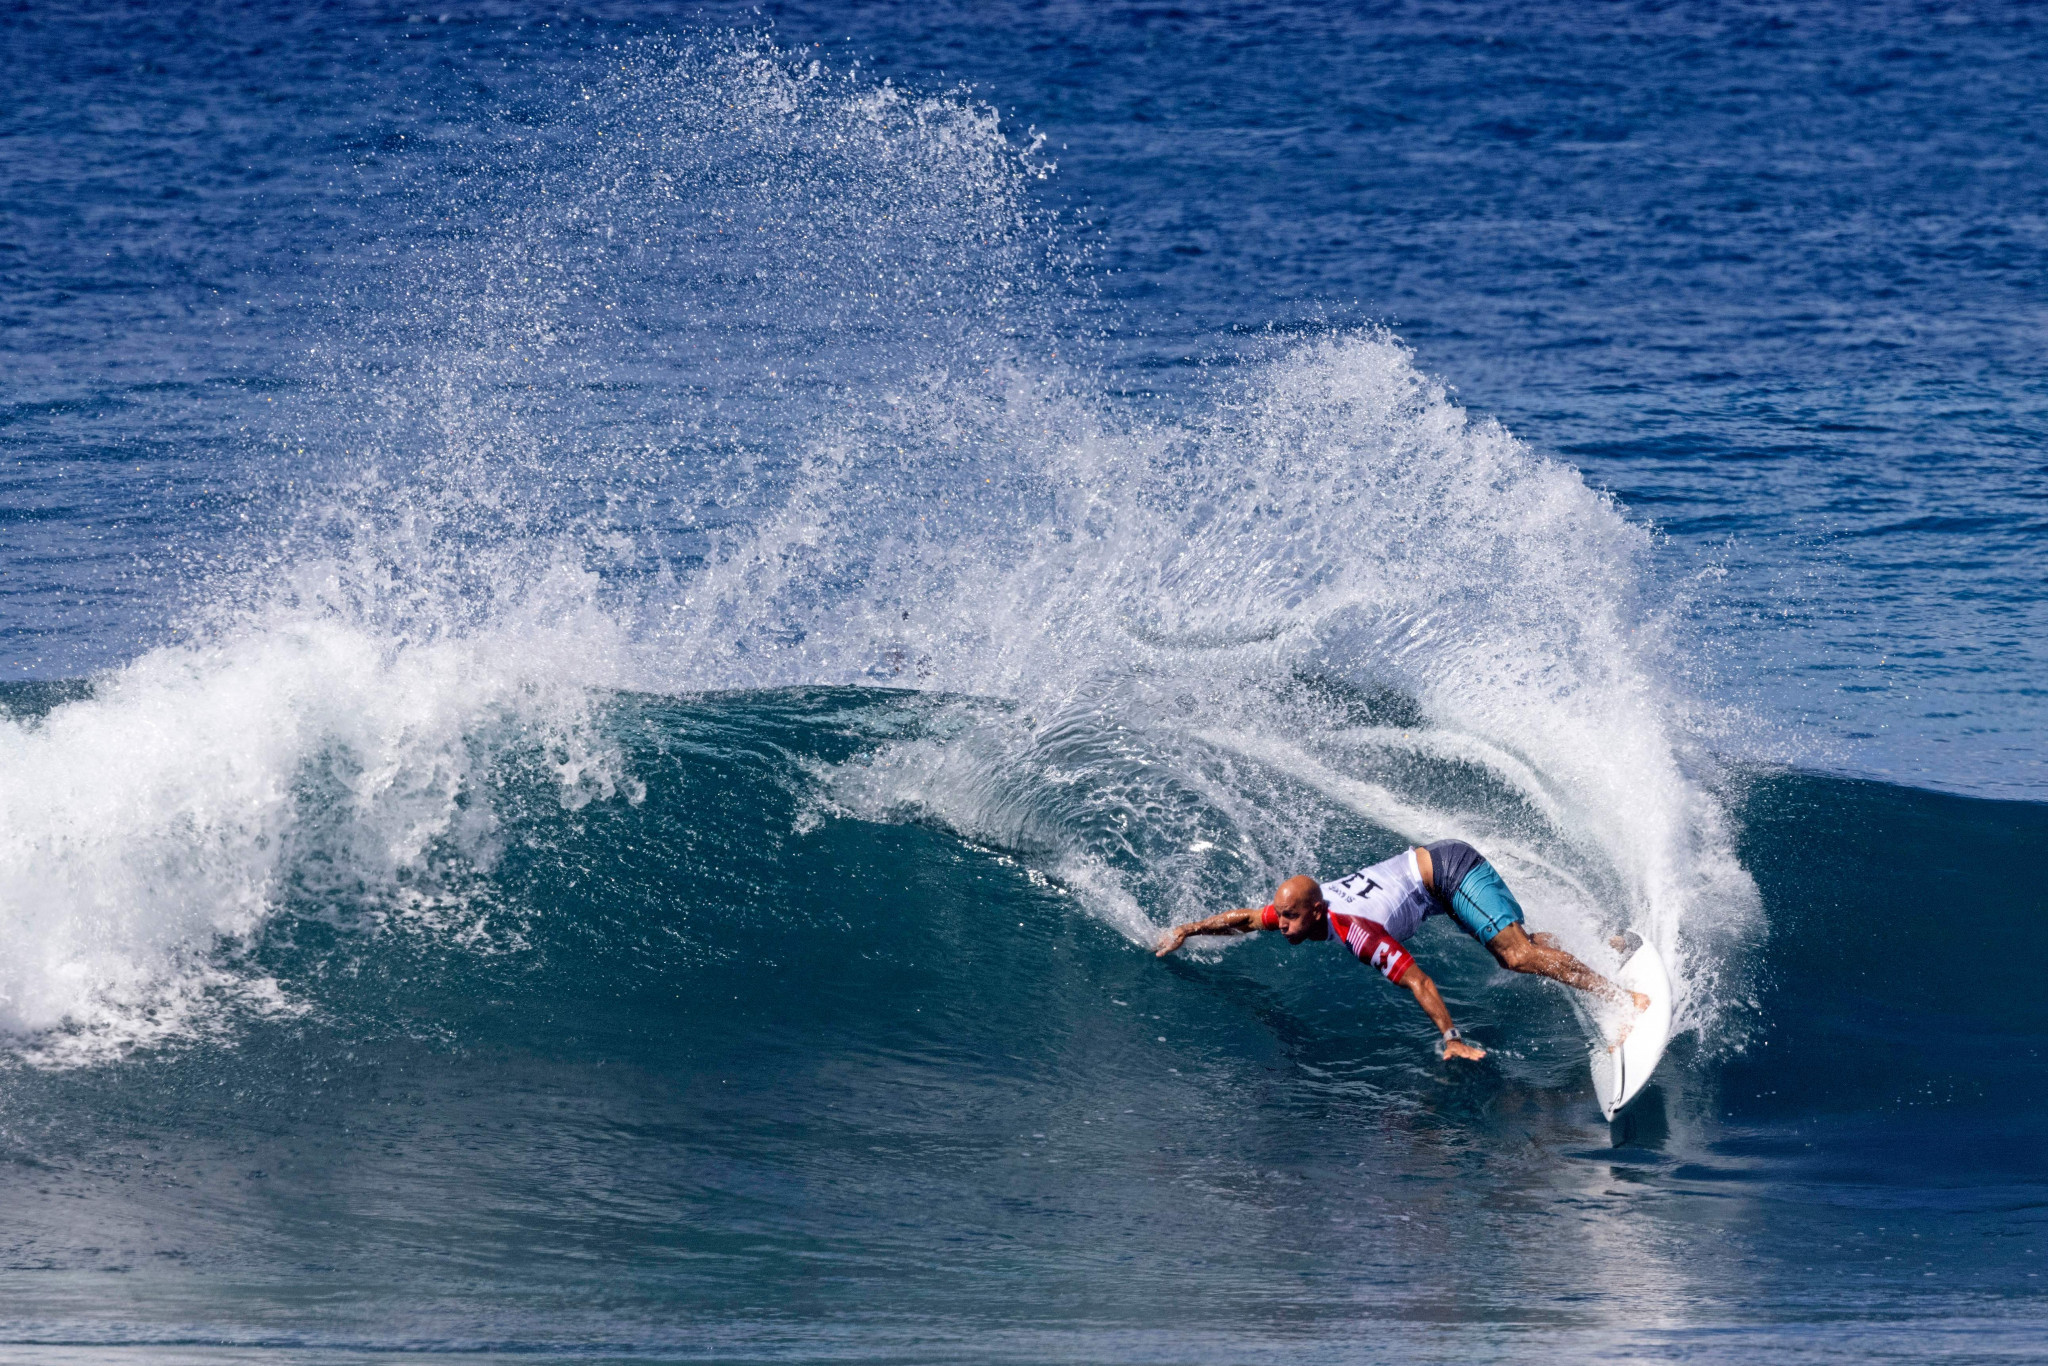 Slater wins WSL Championship Tour event week before 50th birthday